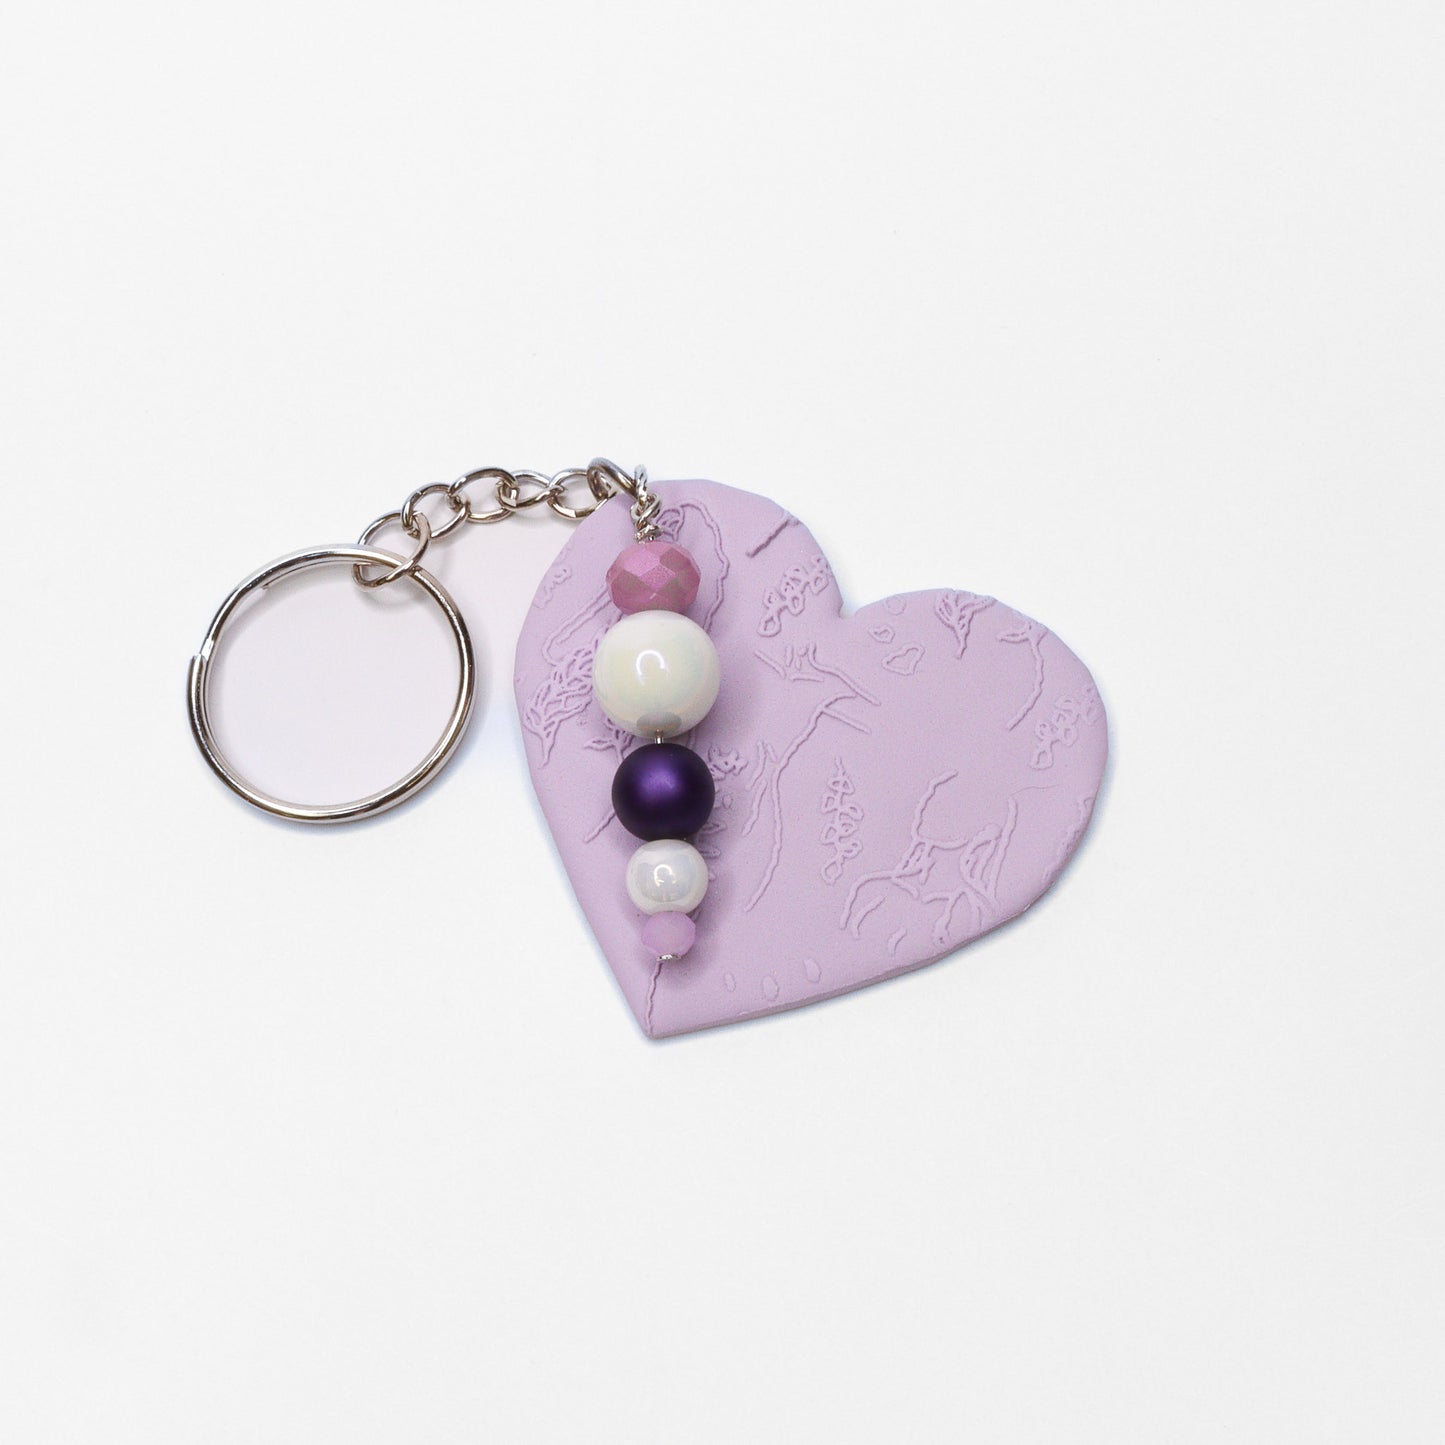 Sweetheart Keychains - Choose Your Color